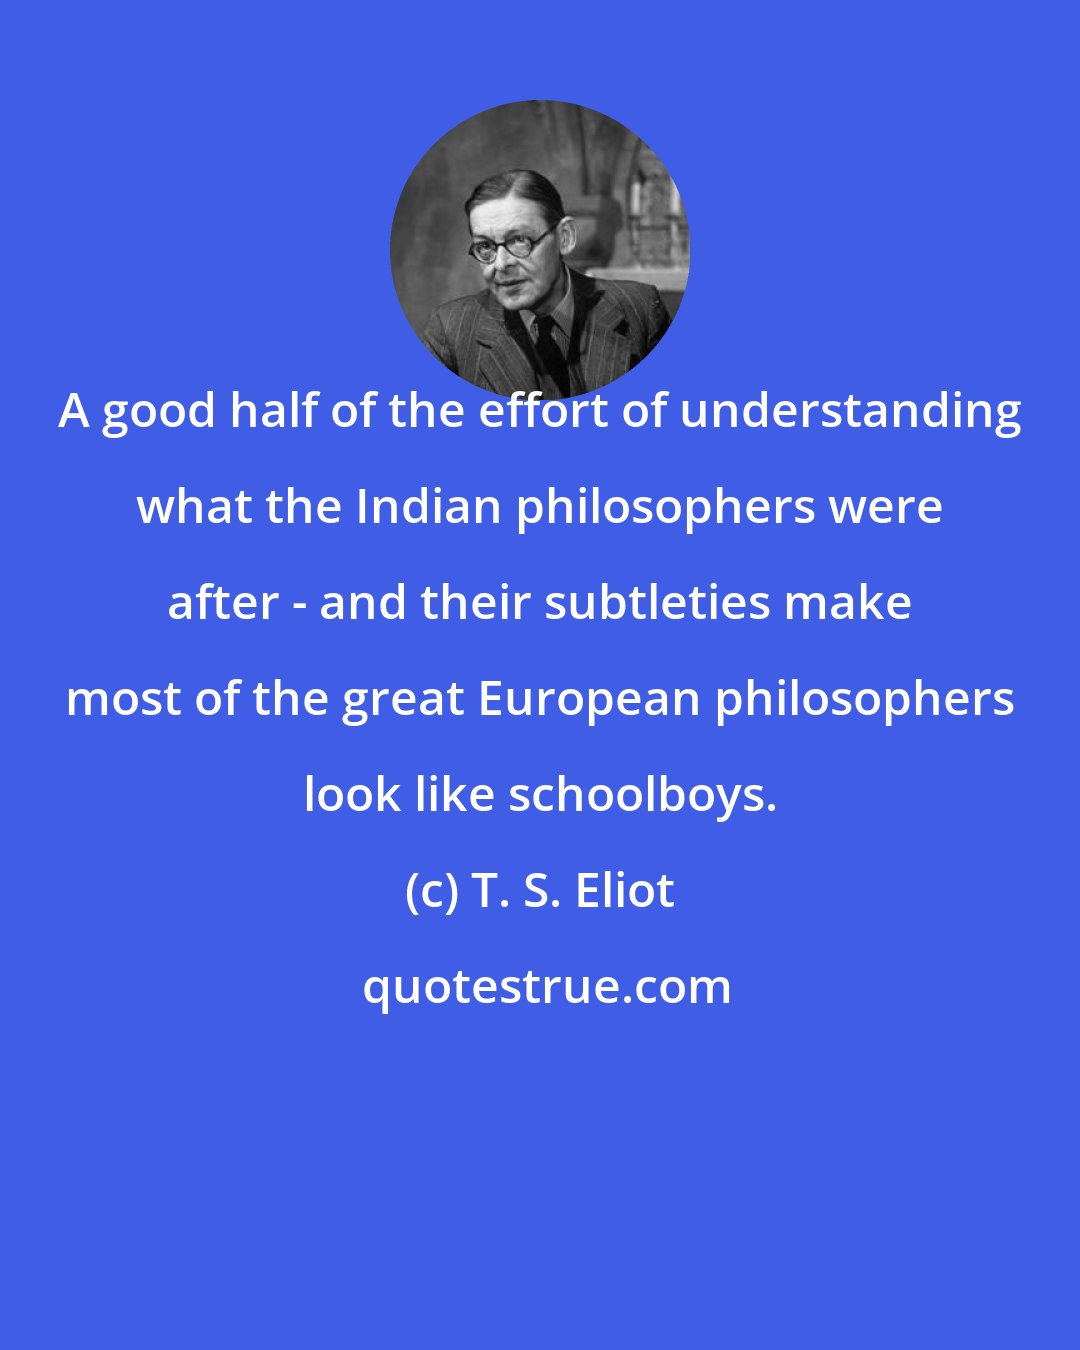 T. S. Eliot: A good half of the effort of understanding what the Indian philosophers were after - and their subtleties make most of the great European philosophers look like schoolboys.